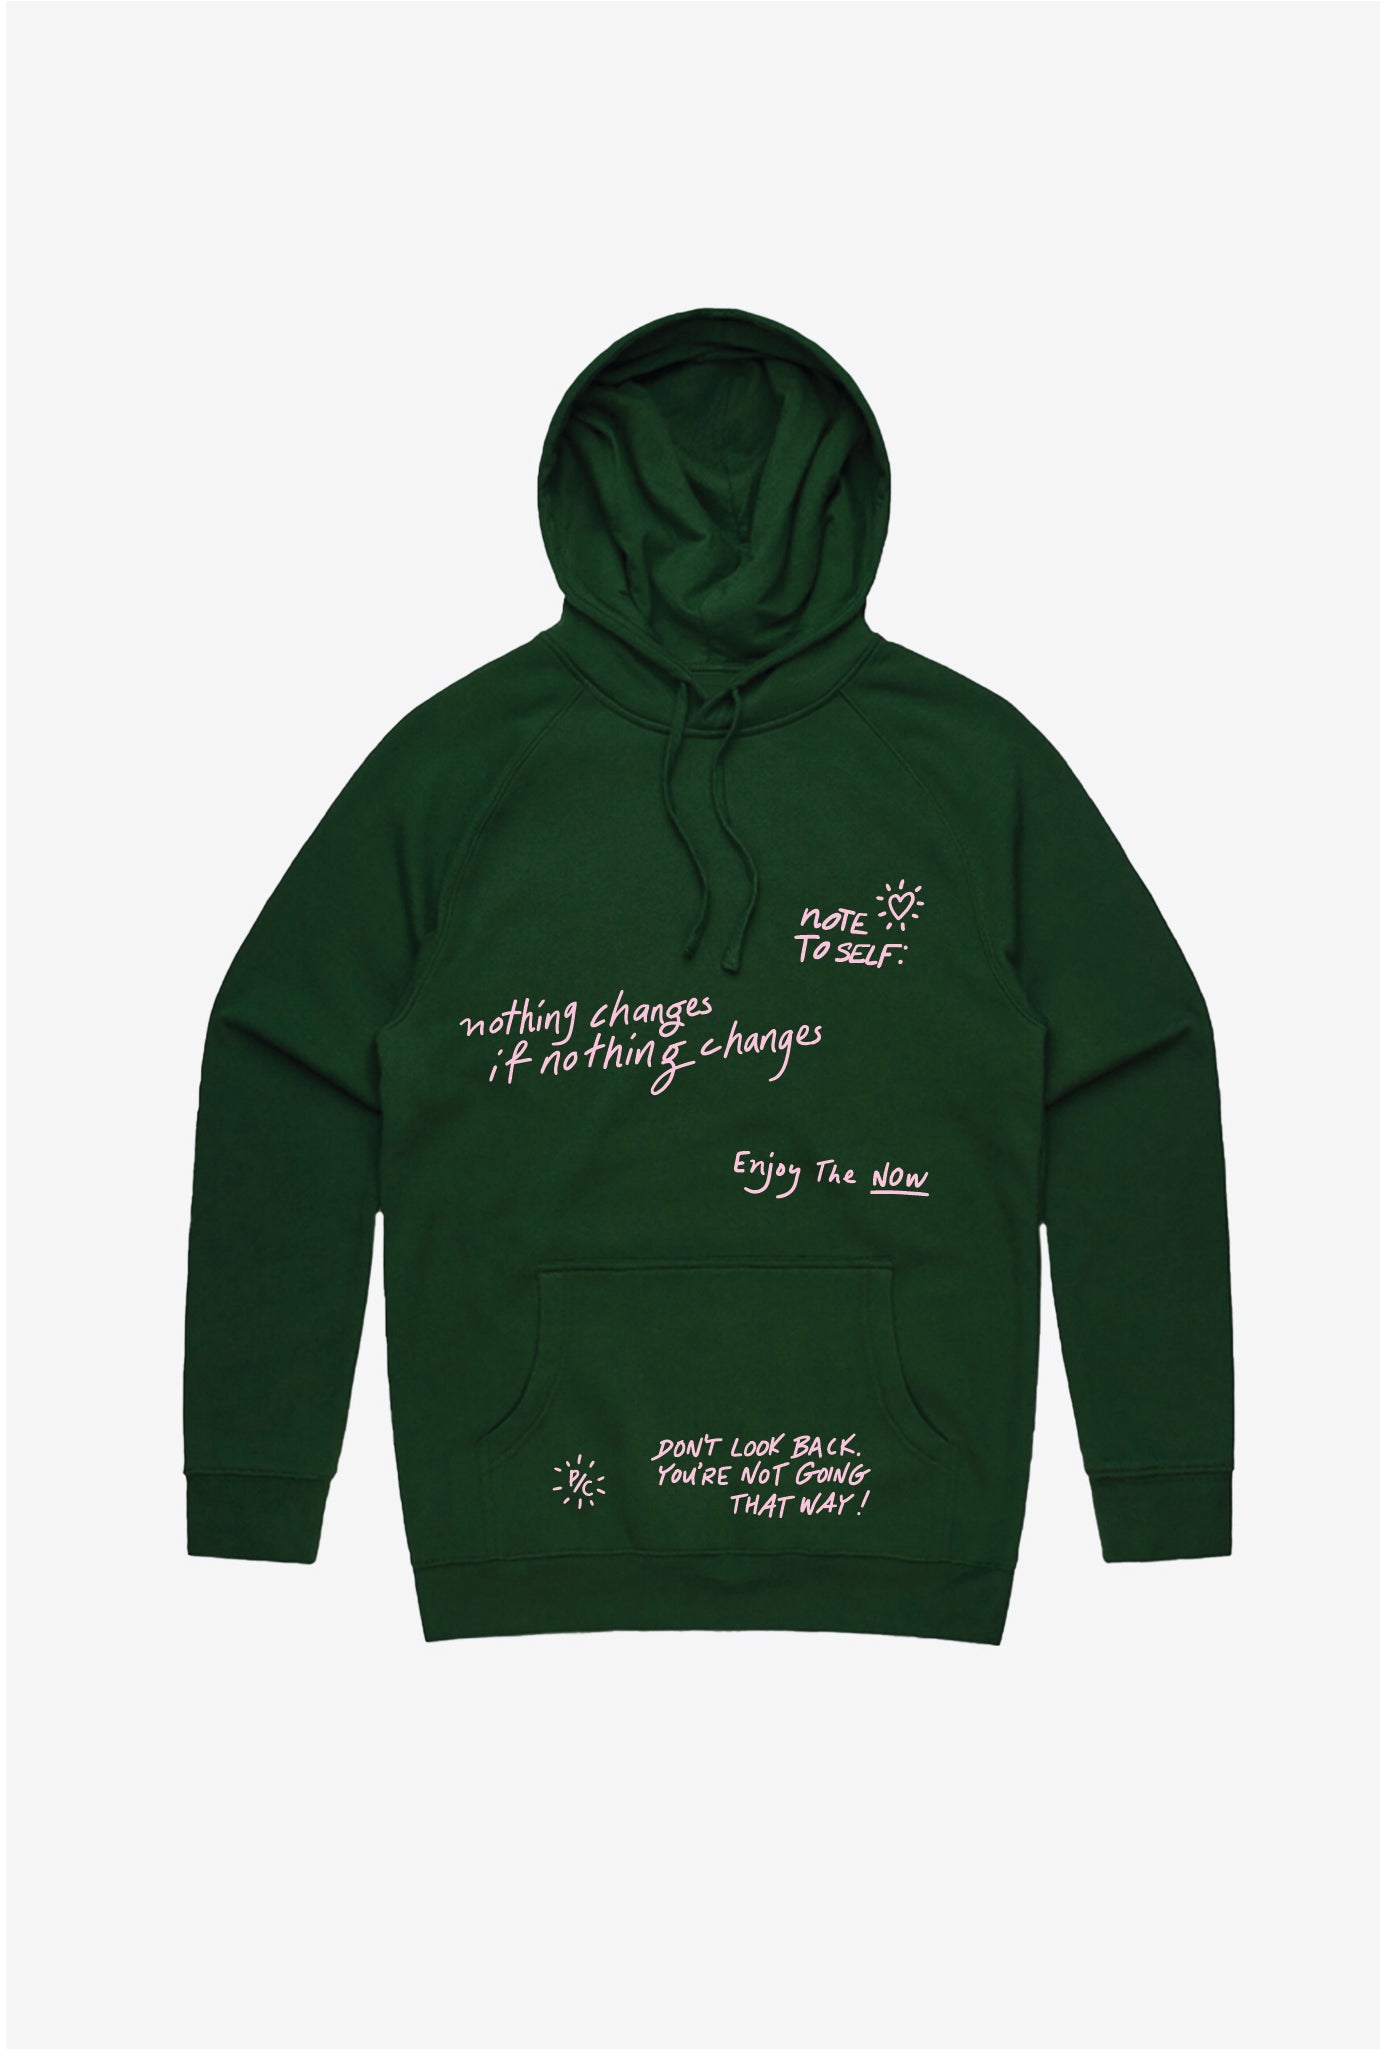 Note to Self Hoodie - Forest Green